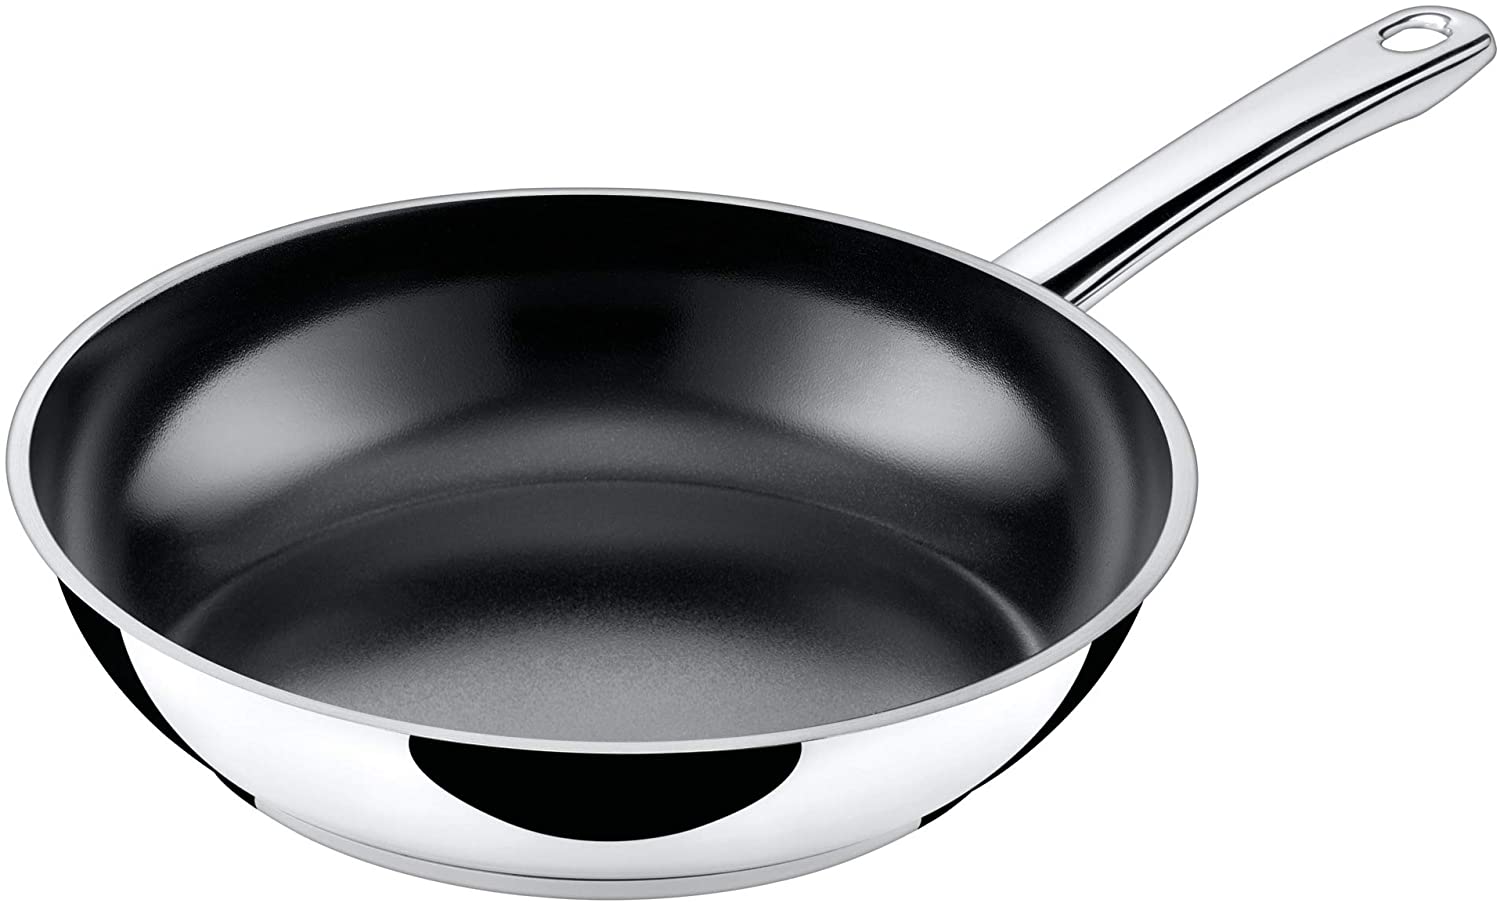 Silit Talis Frying Pan, Stainless Steel Coating, Ceramic Coating, Suitable for Induction Oven, PTFE / PFOA Free, transparent, 2110300434